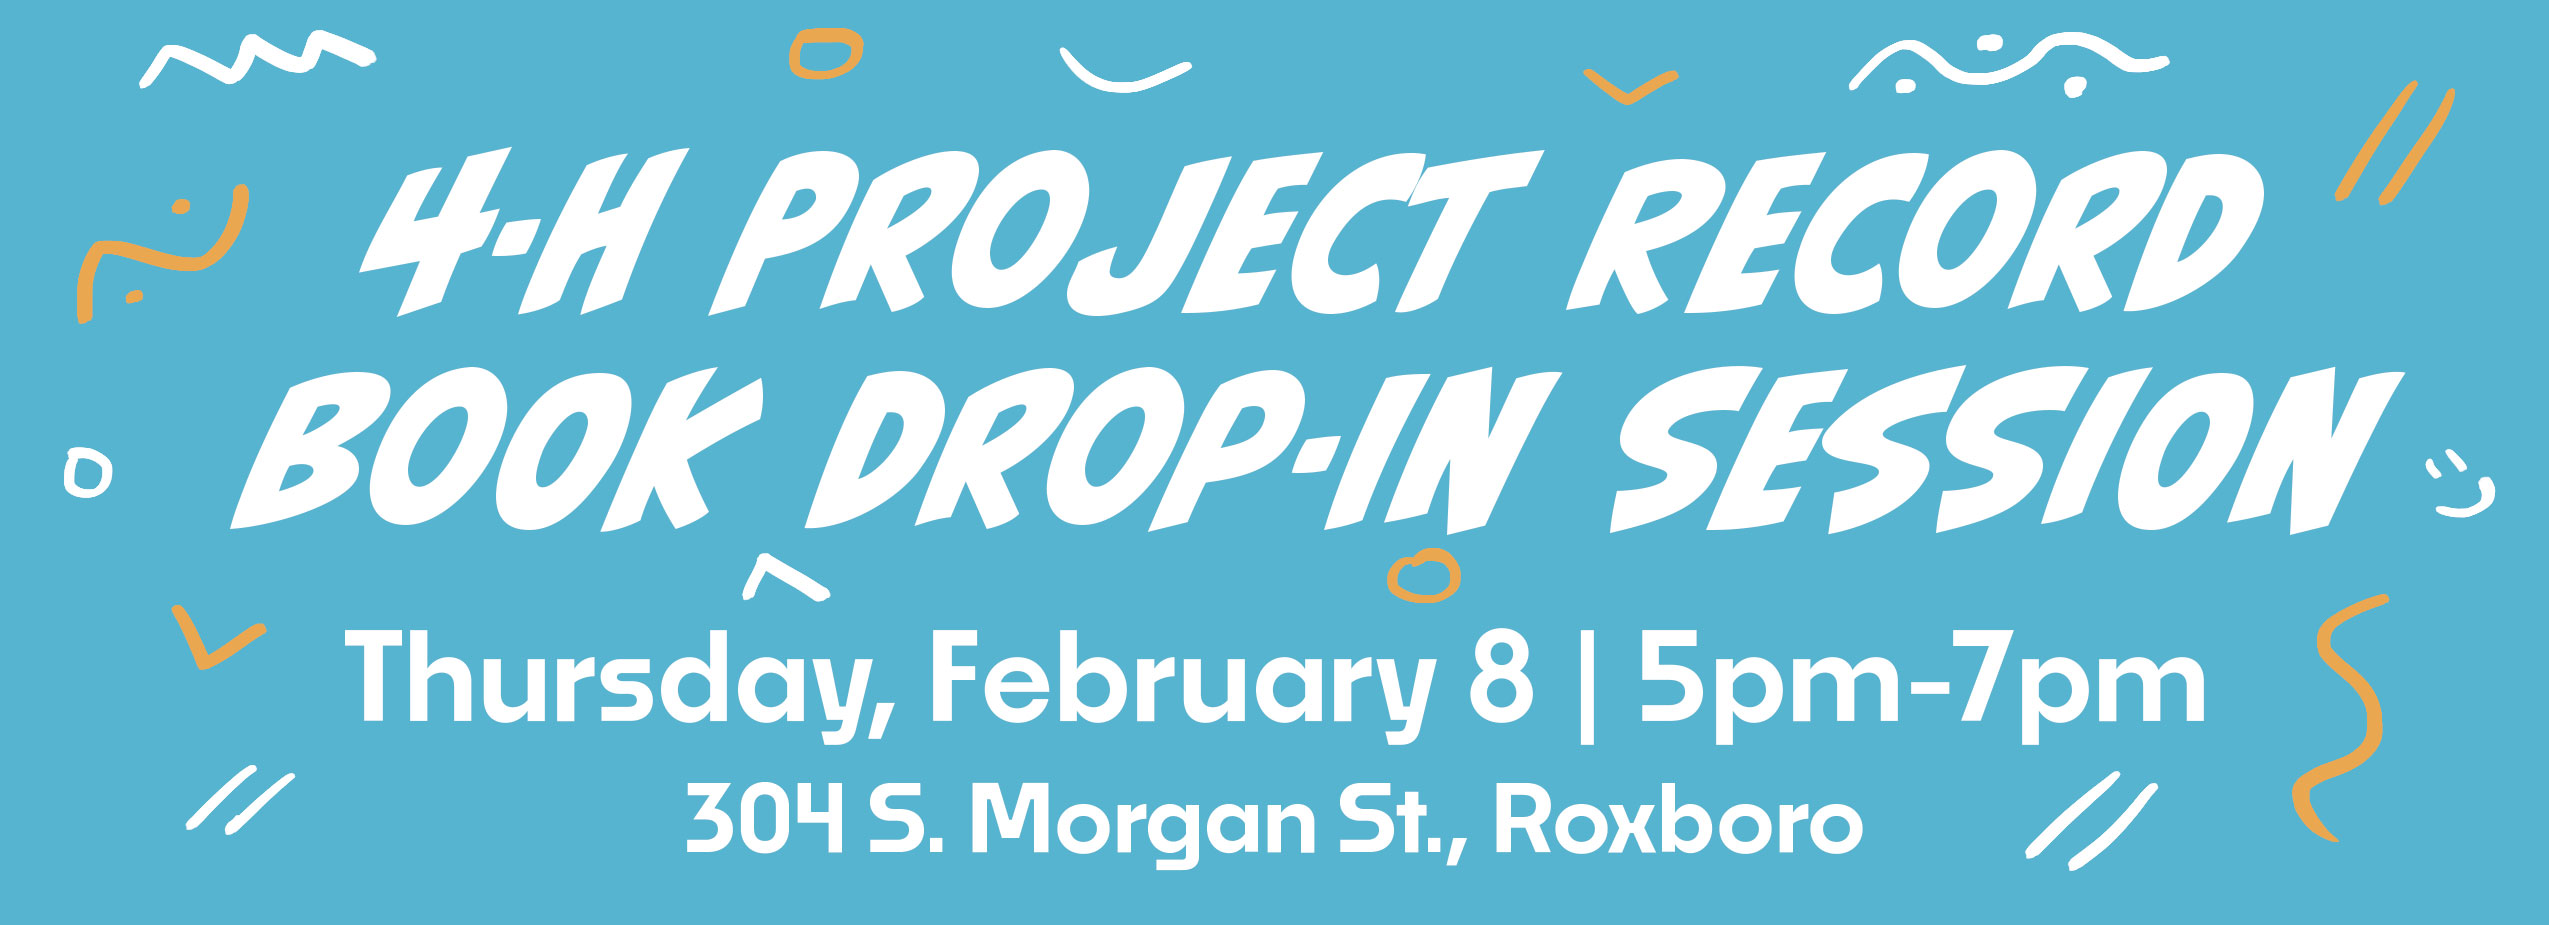 Project Record Book Drop-In Session Thursday Feb 8 from 5 p.m.-7 p.m.